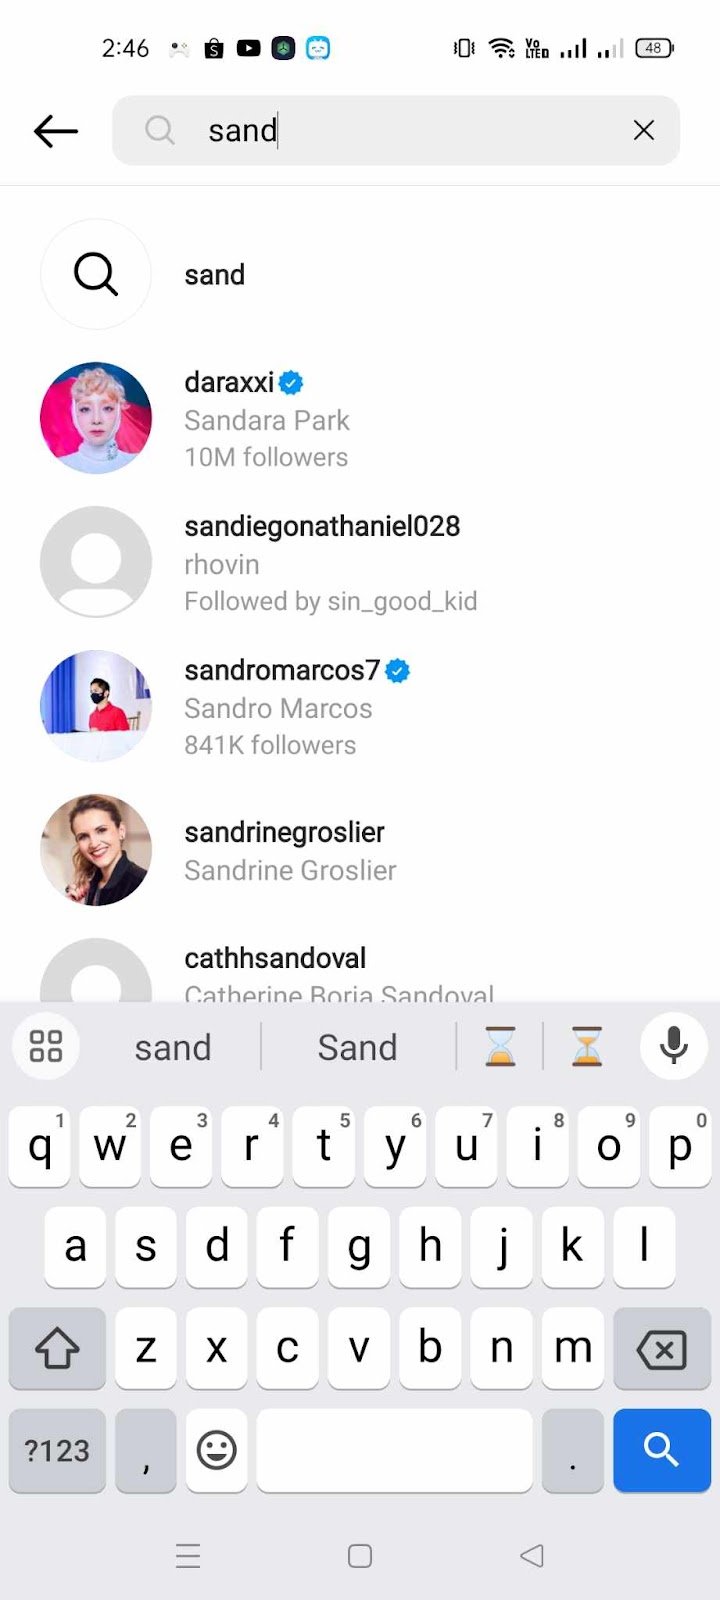 How to See Sent Follow Requests - Search